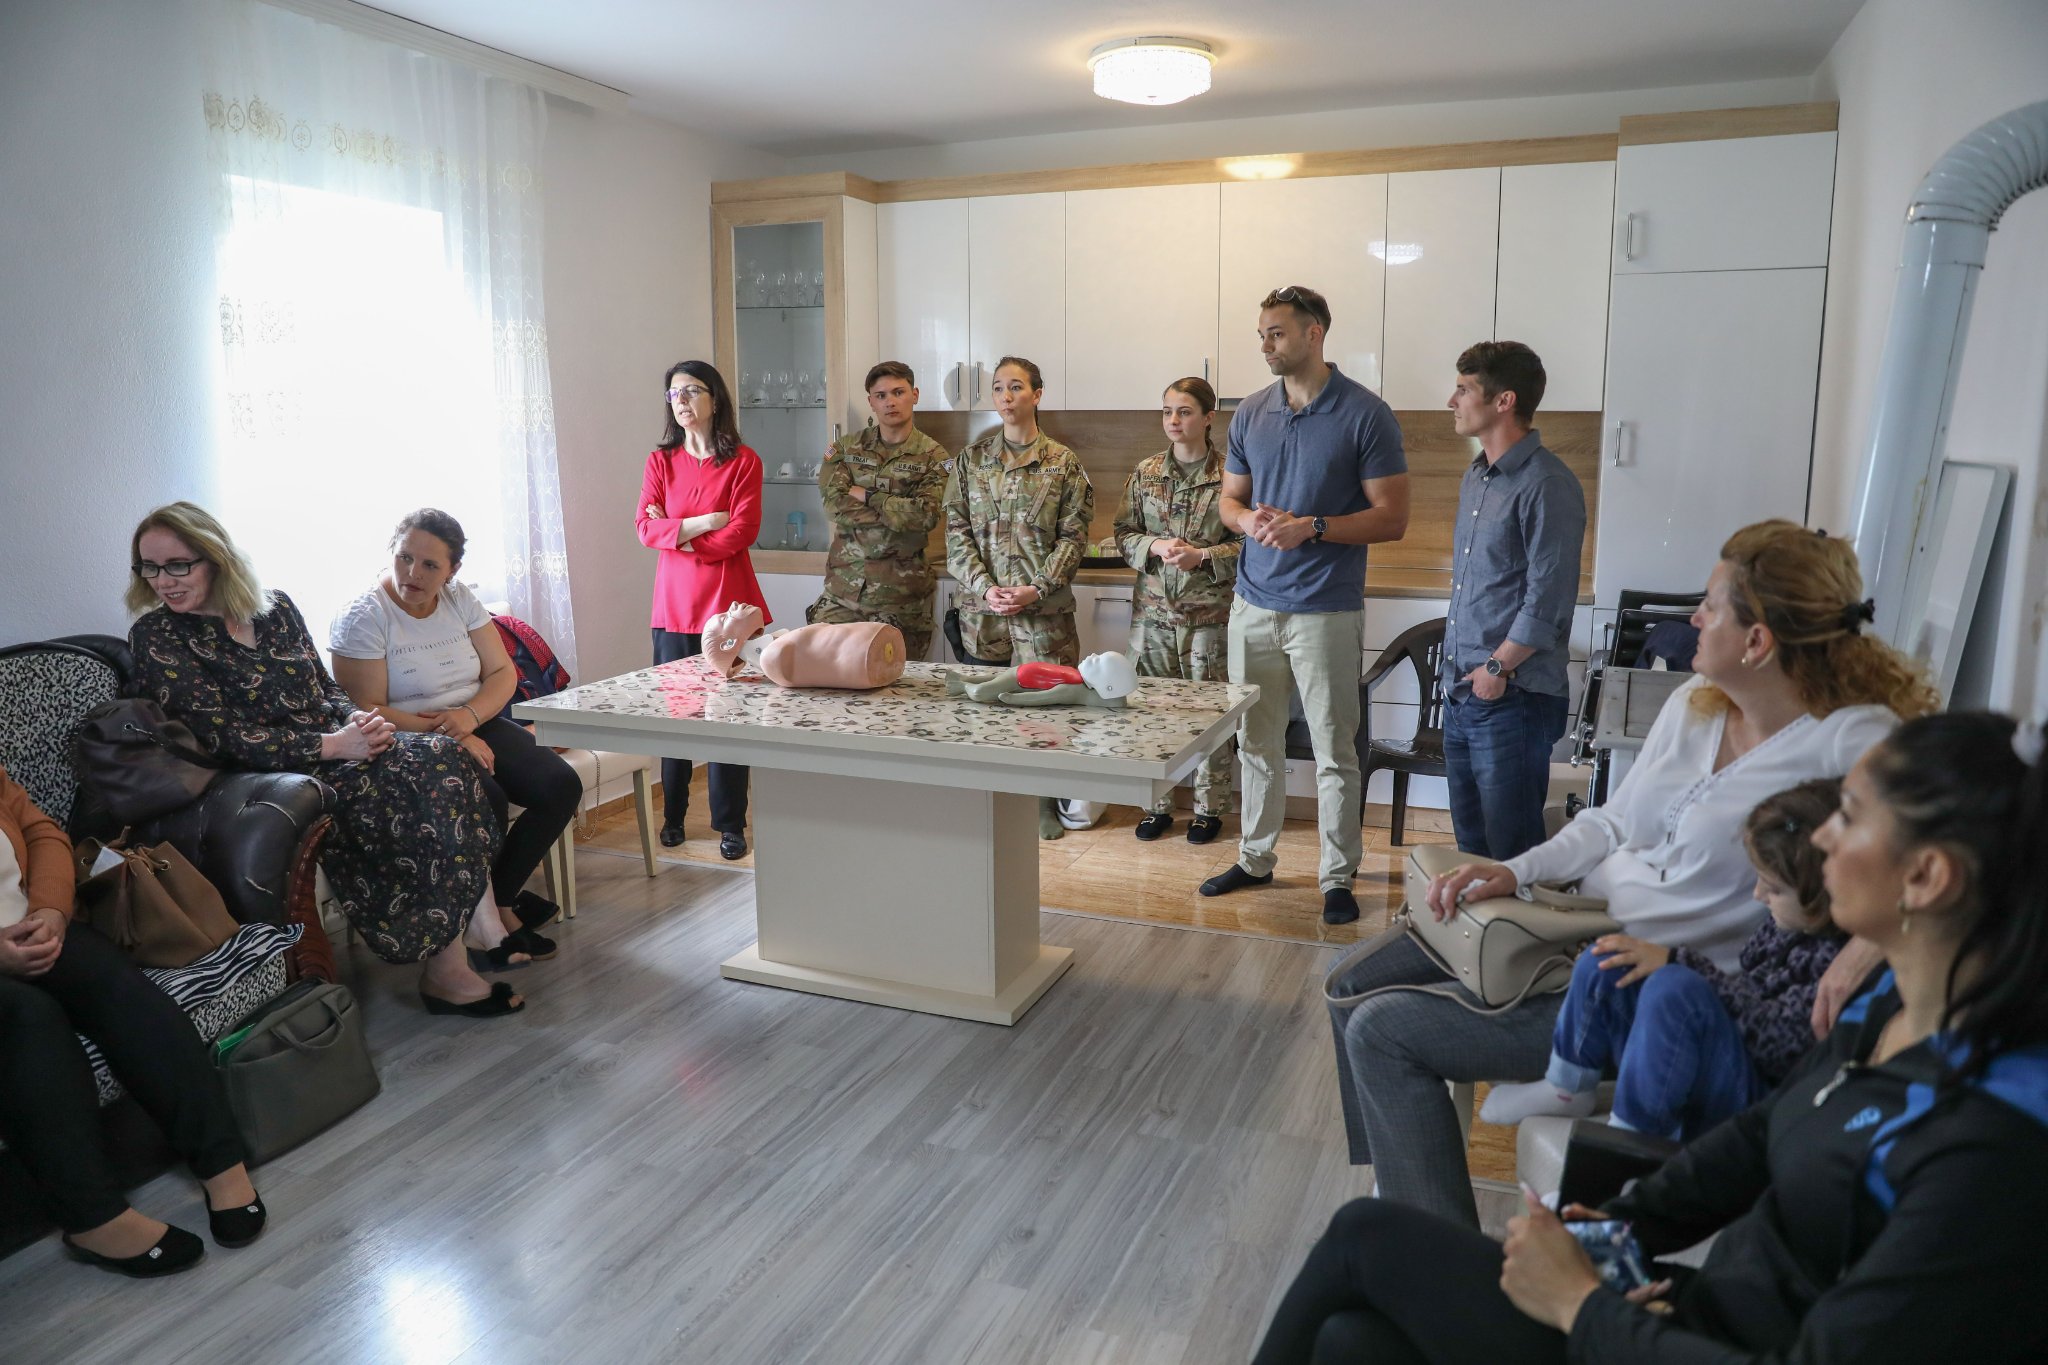 Training By Members of the Civil-Military Support Element of the American Embassy (CMSE) in Baica Village